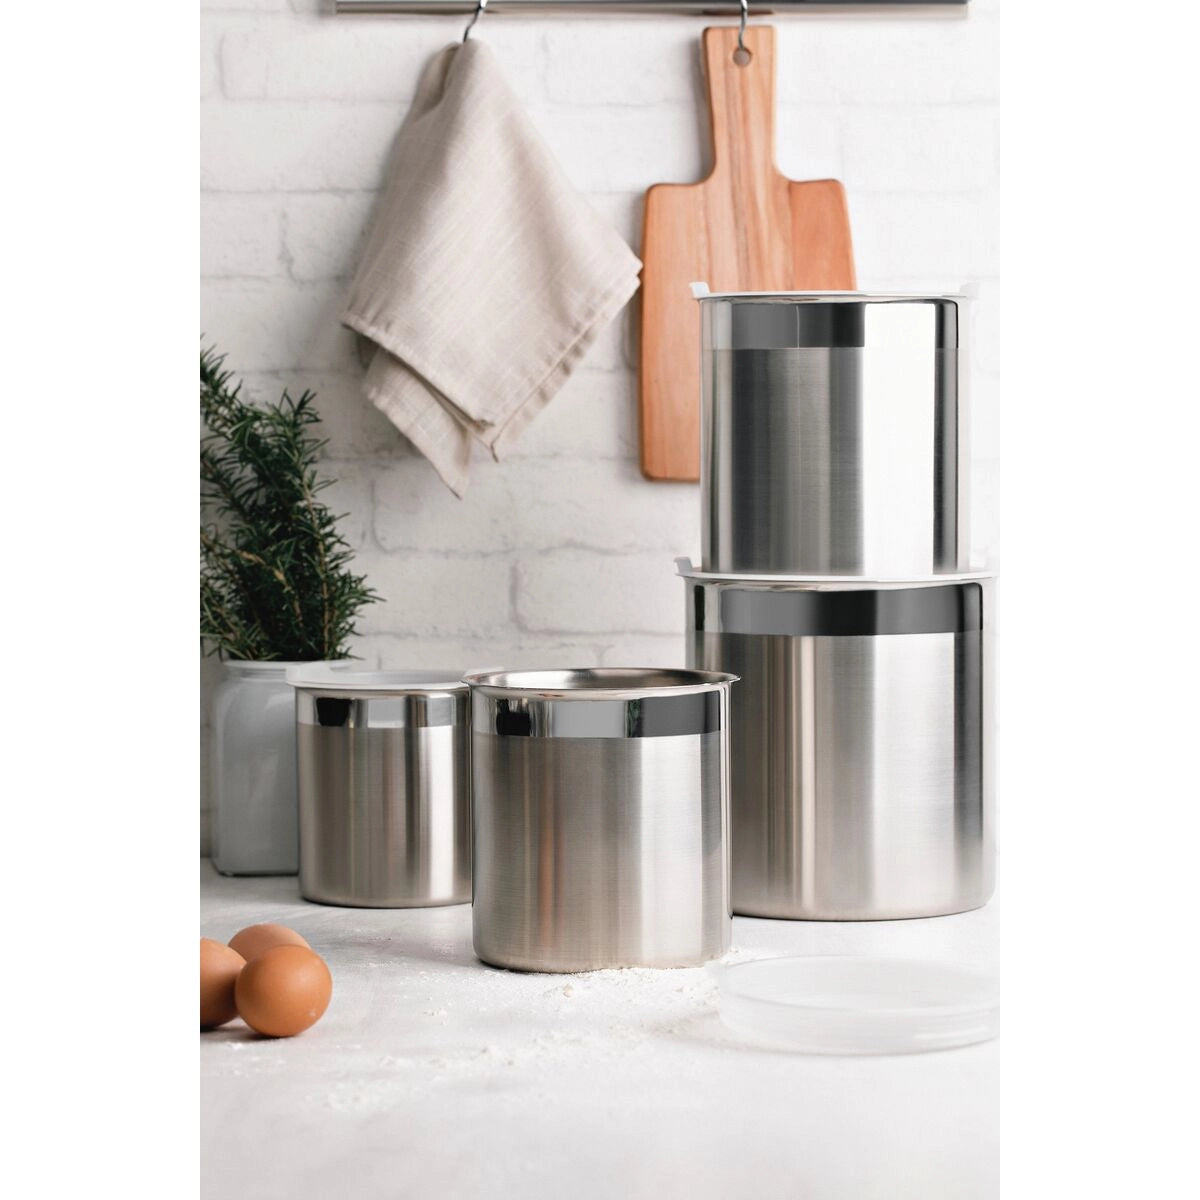 Tramontina Freezinox square stainless steel container set with plastic lid